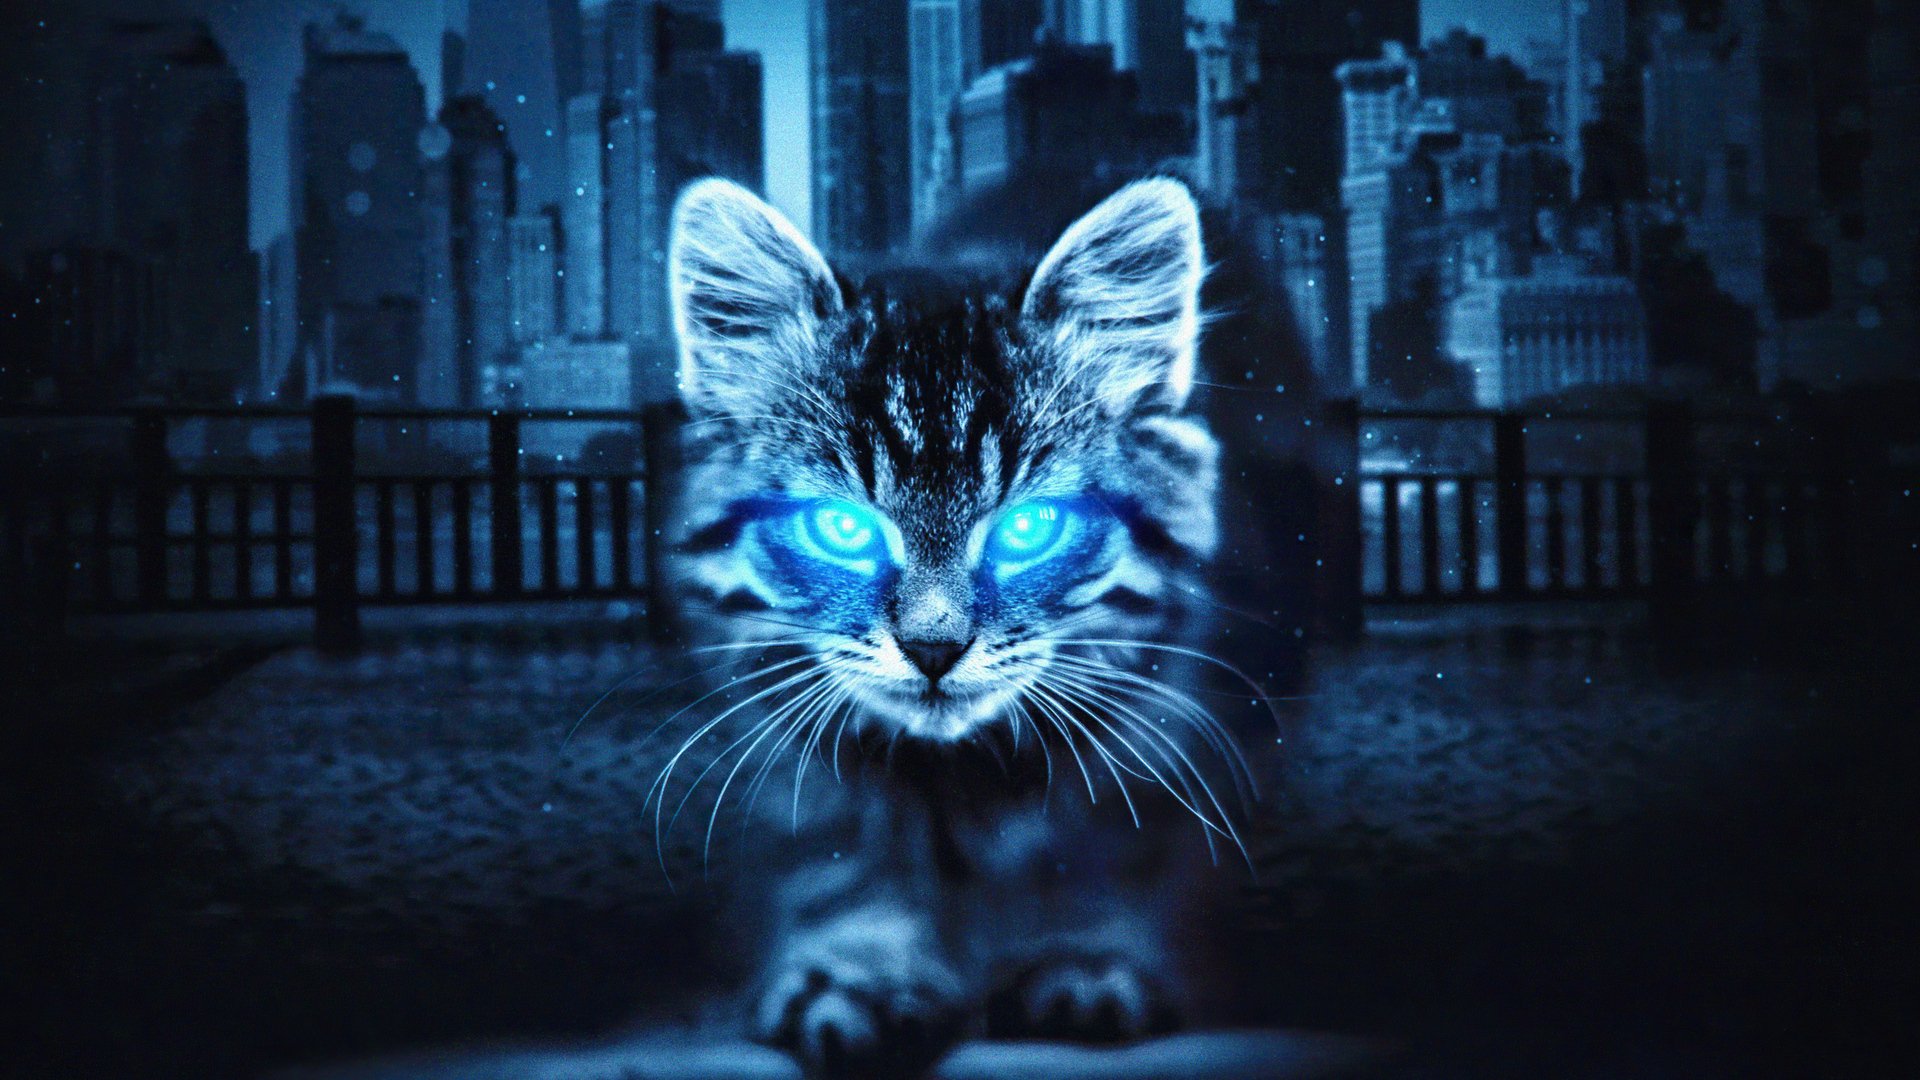 Cat with Glowing Eyes in the Night